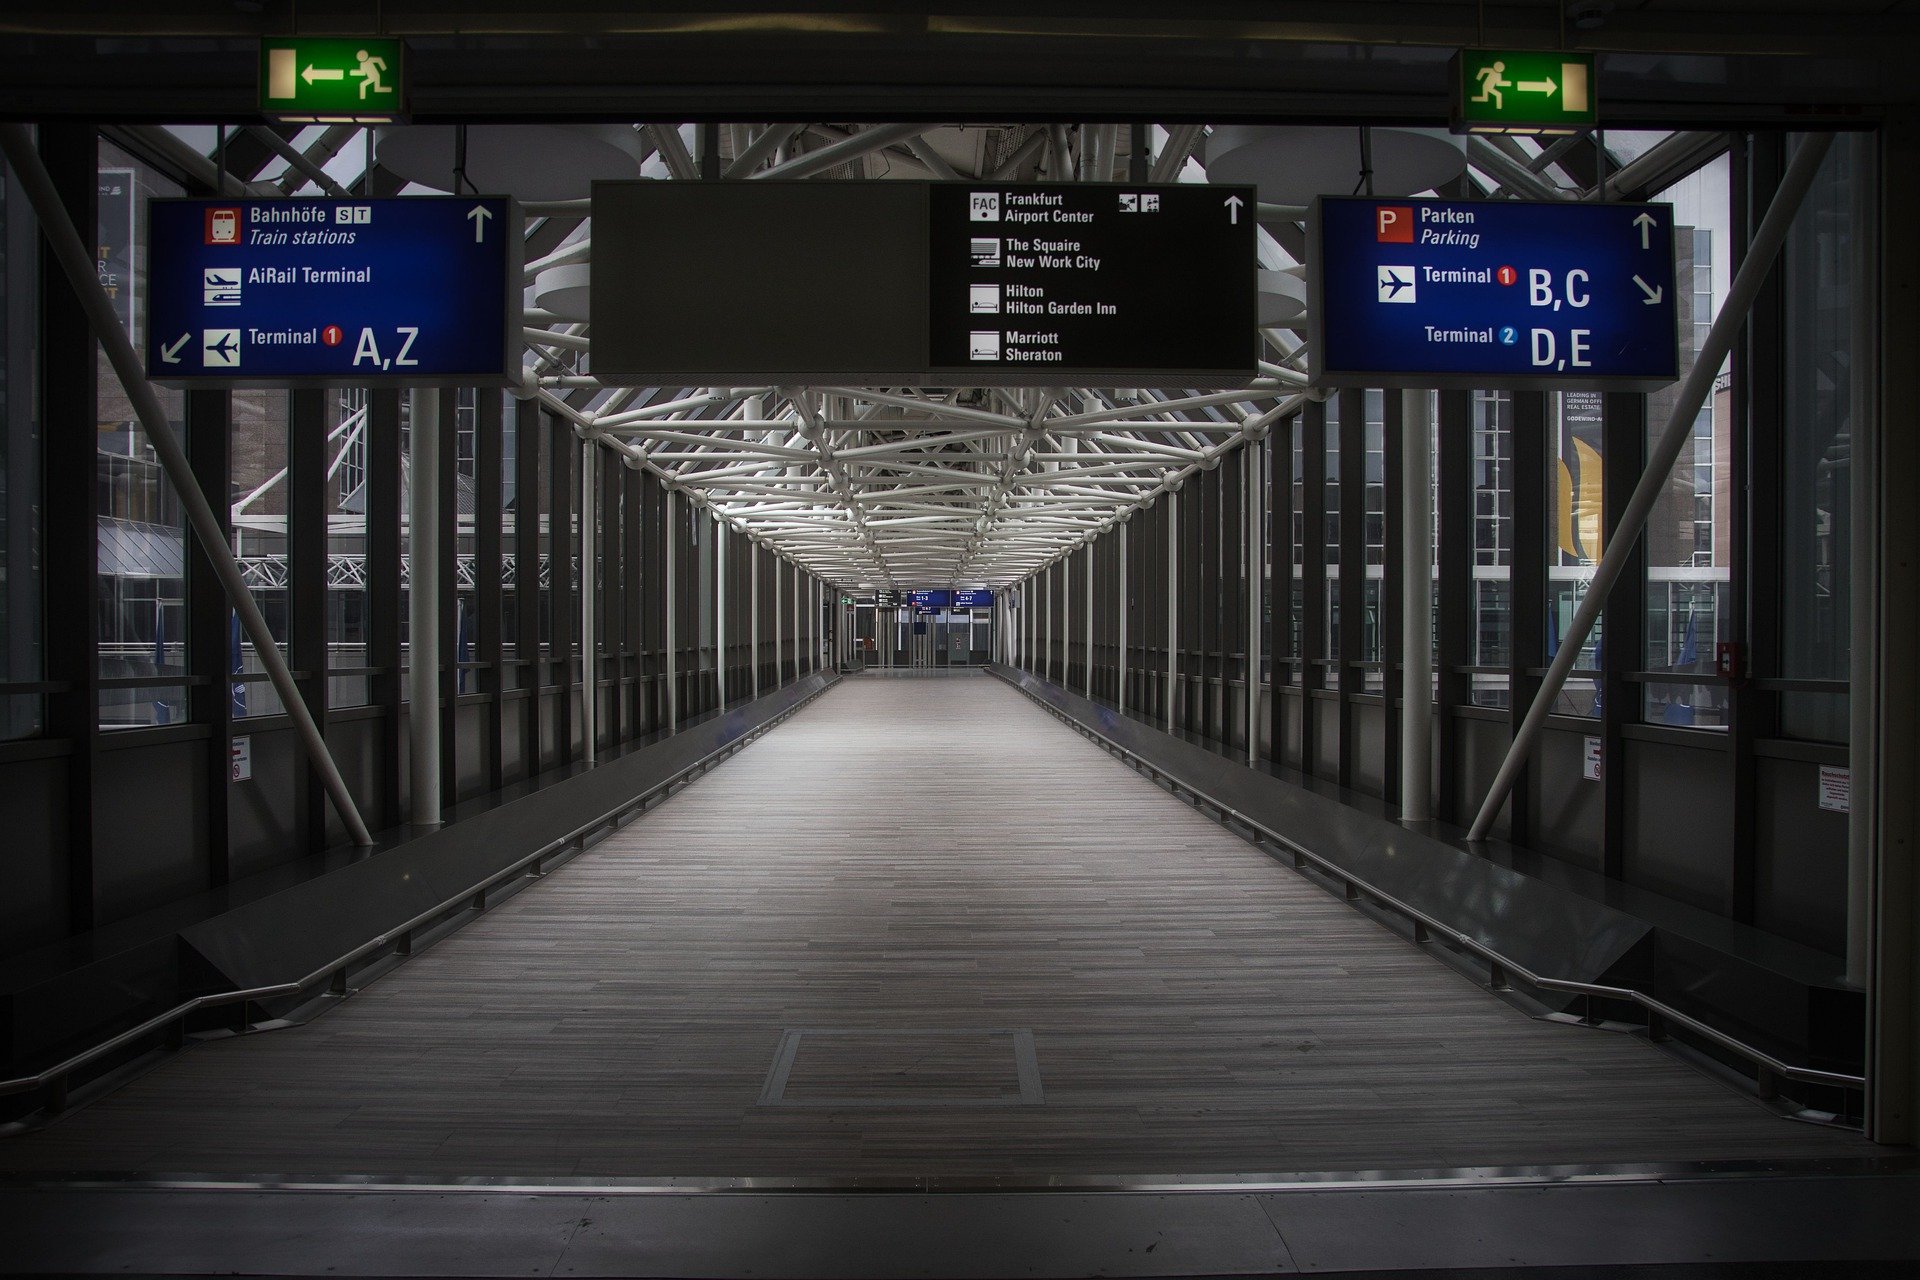 causeway to different terminals in airports